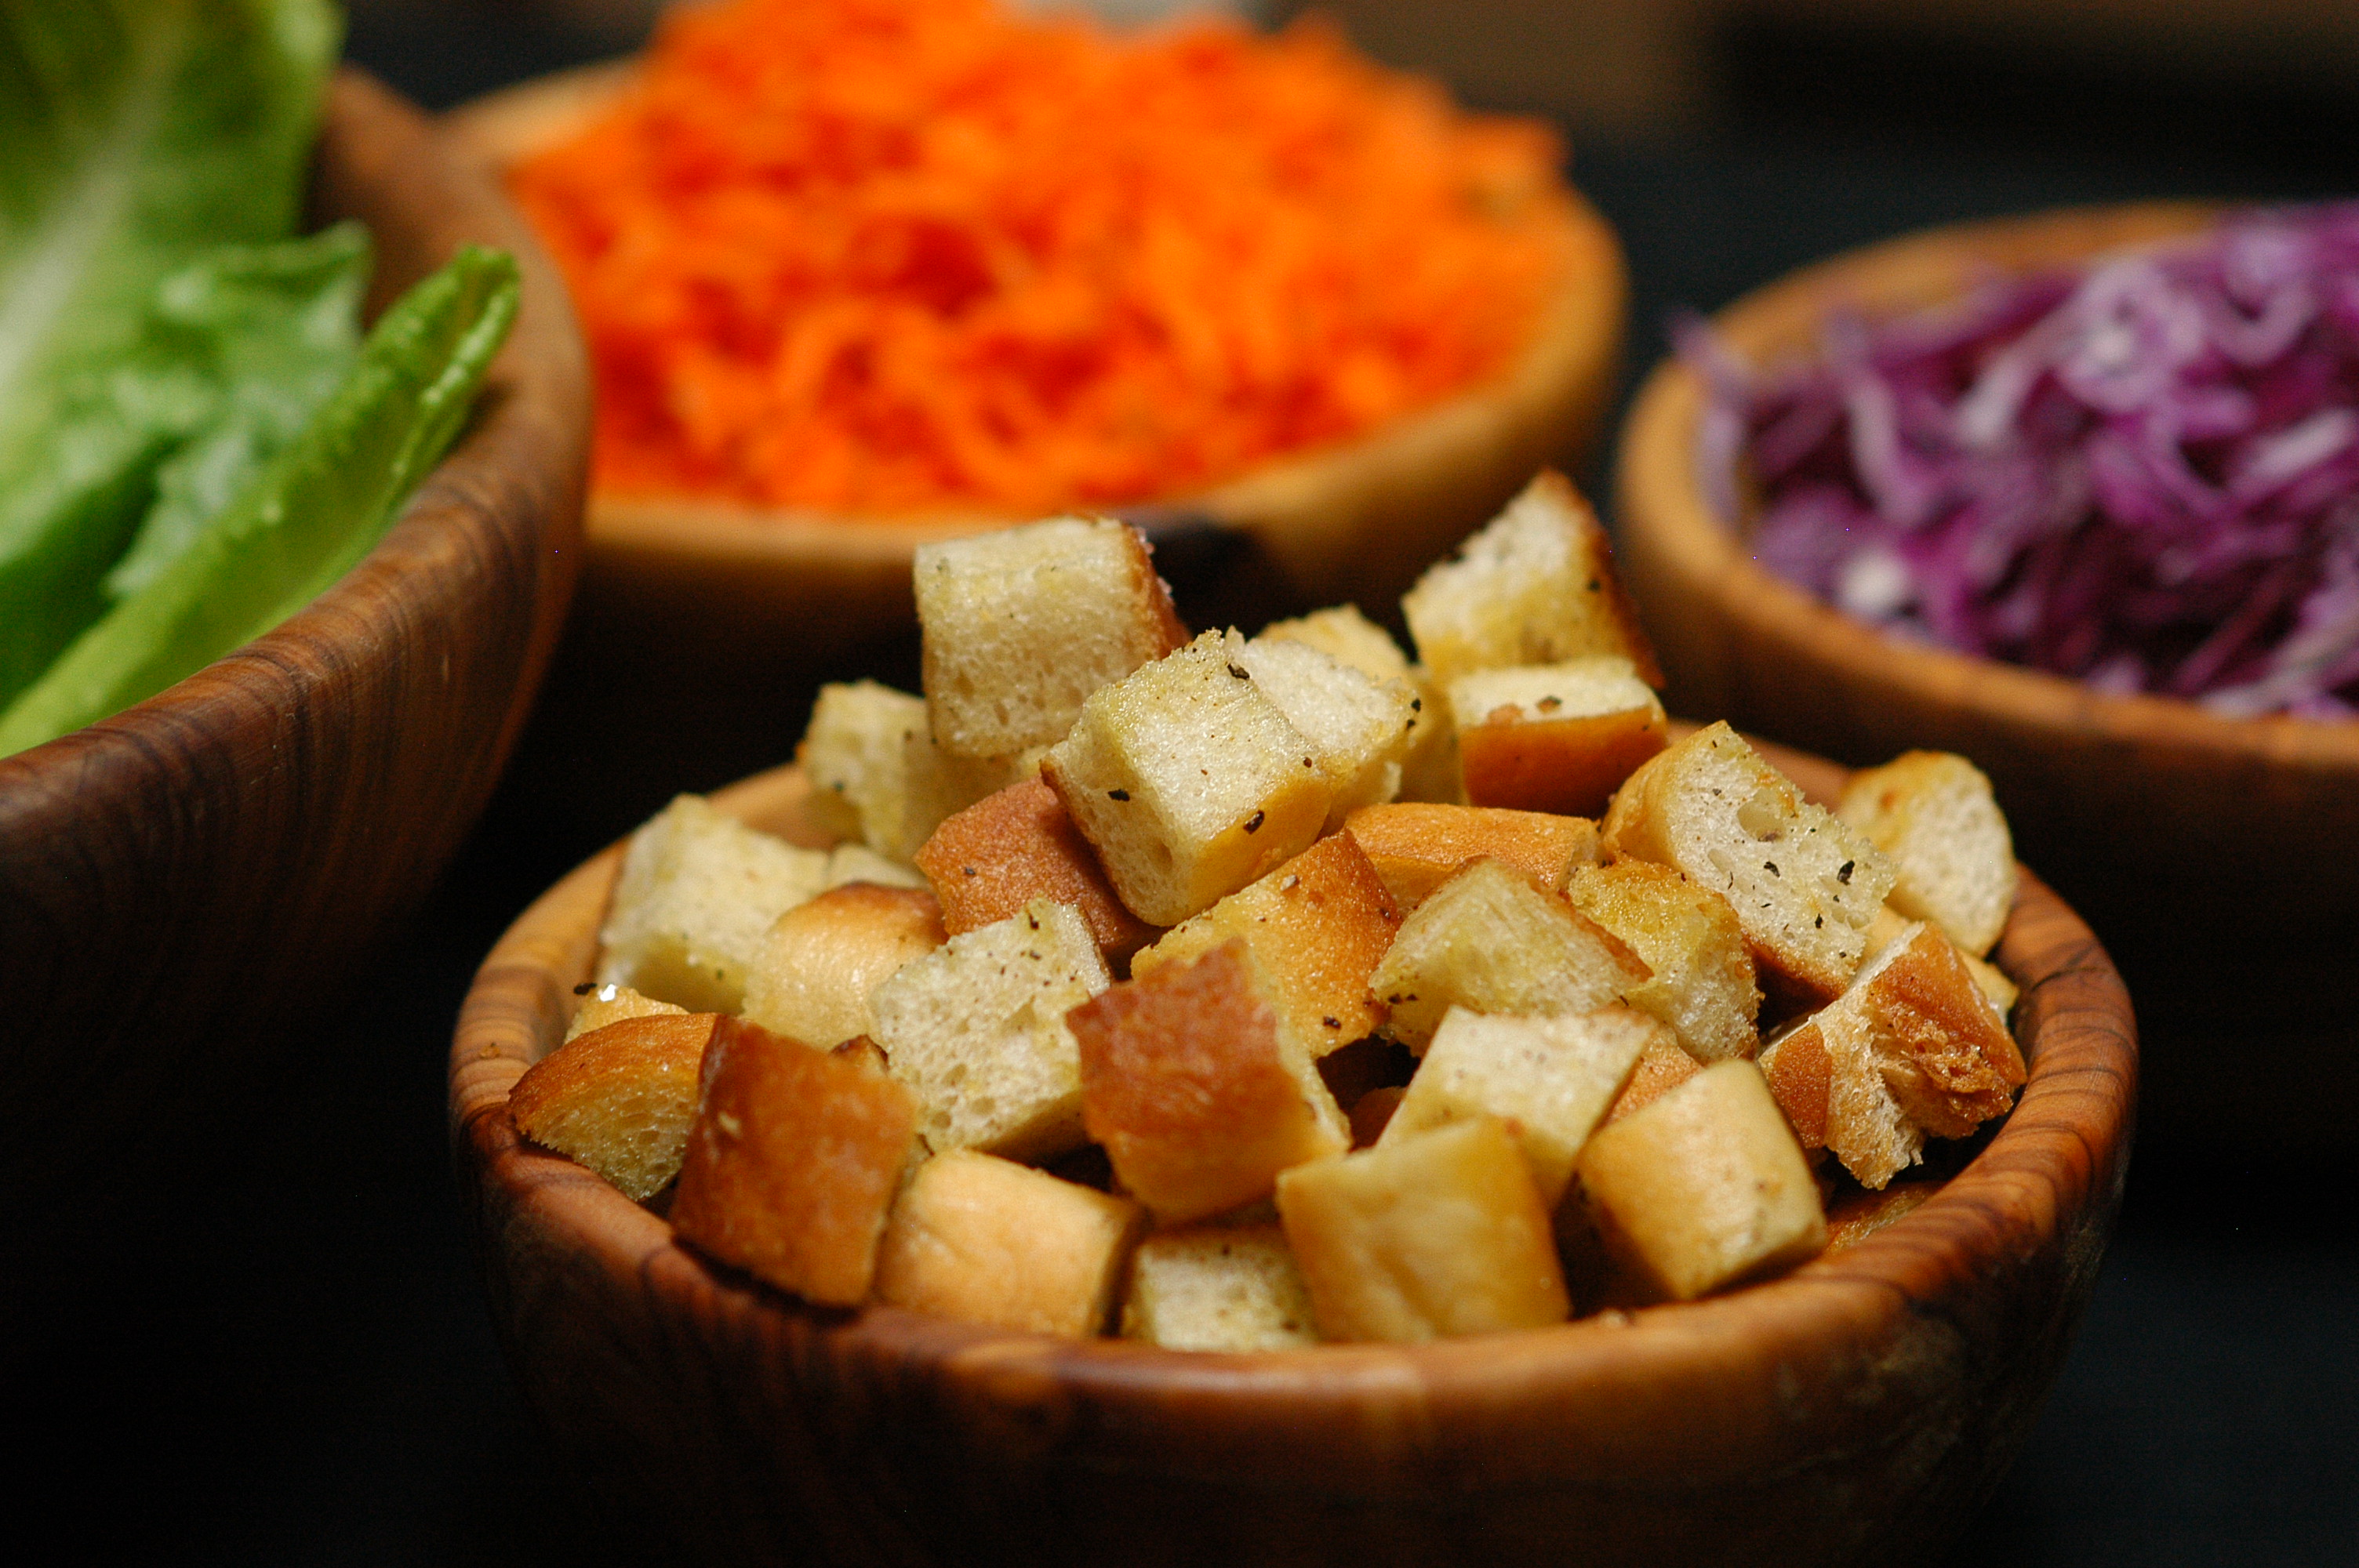 Croutons – Top Salads with Butane or Bread?